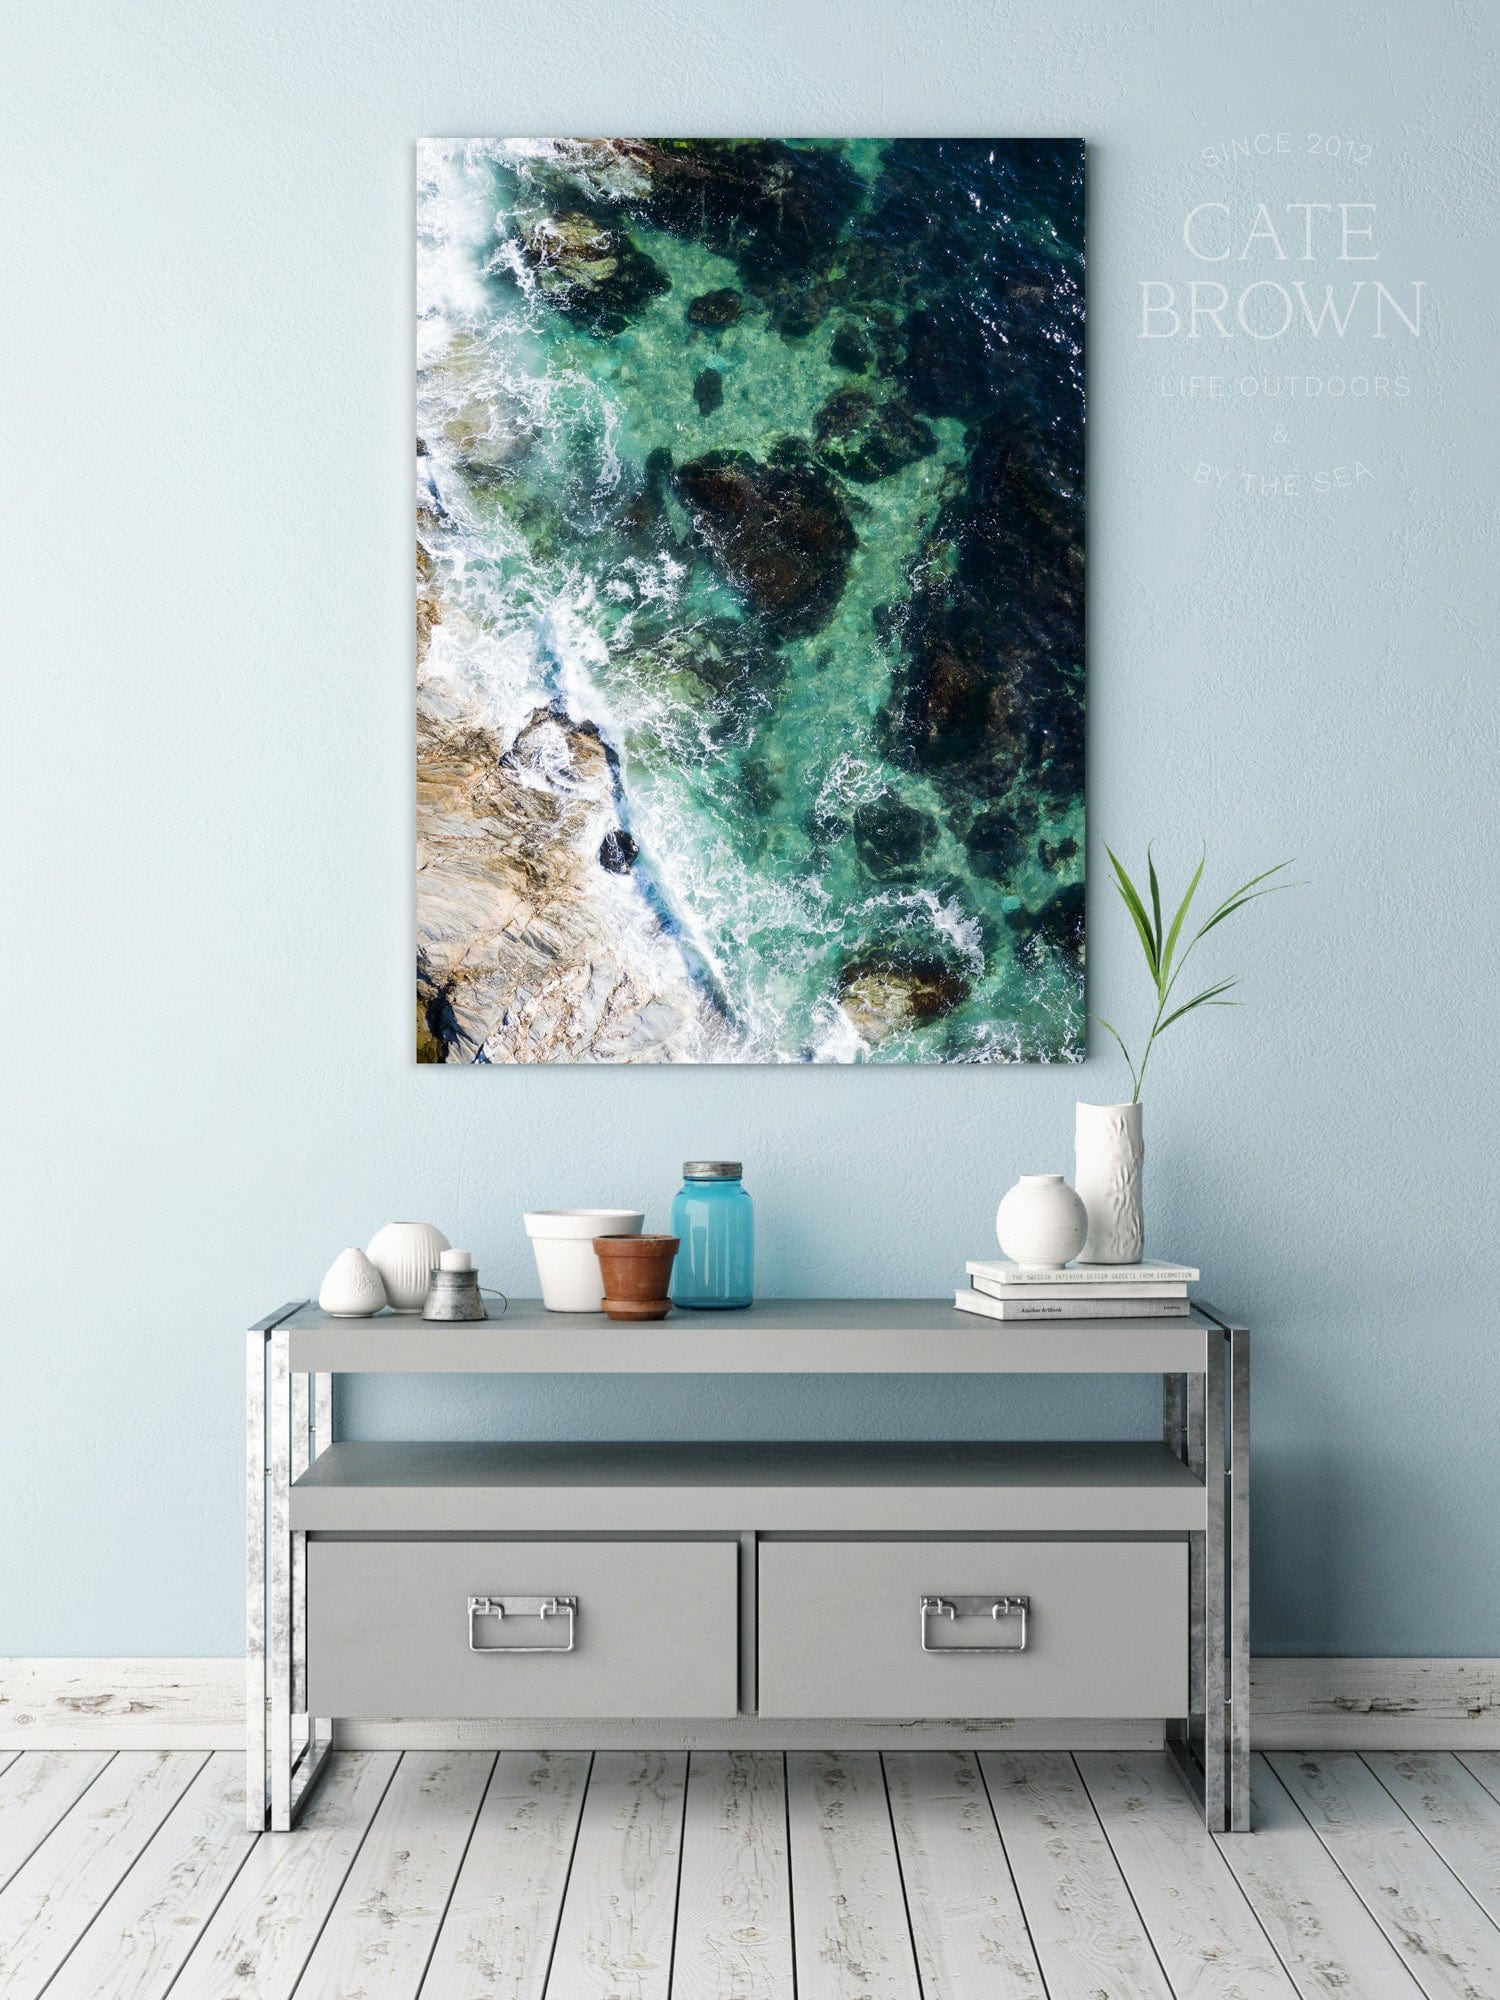 Cate Brown Photo Canvas / 16"x24" / None (Print Only) Beavertail #10  //  Aerial Photography Made to Order Ocean Fine Art